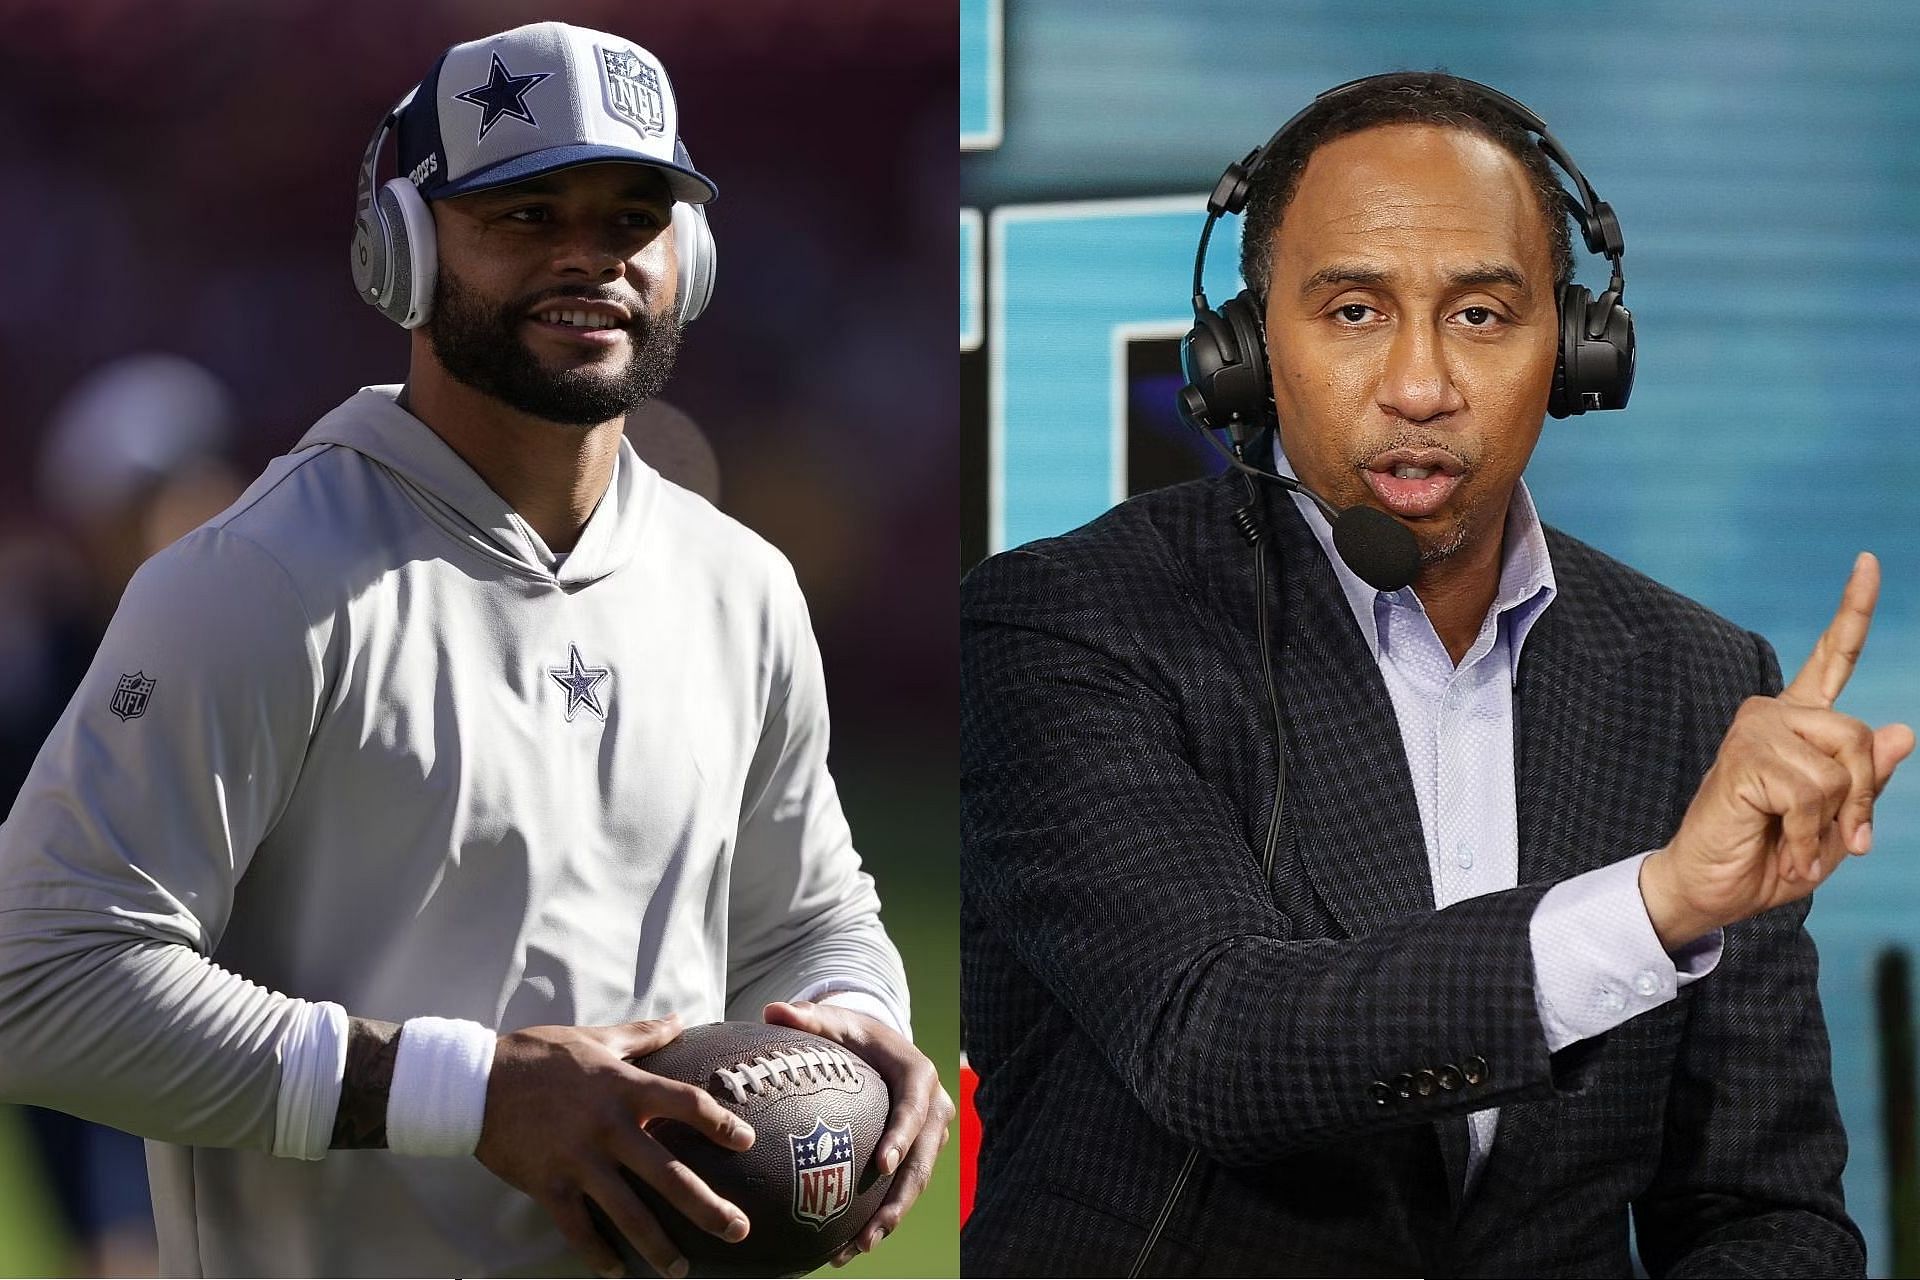 tephen A. Smith shows support for Dak Prescott after insensitive comments towards Cowboys QB from media